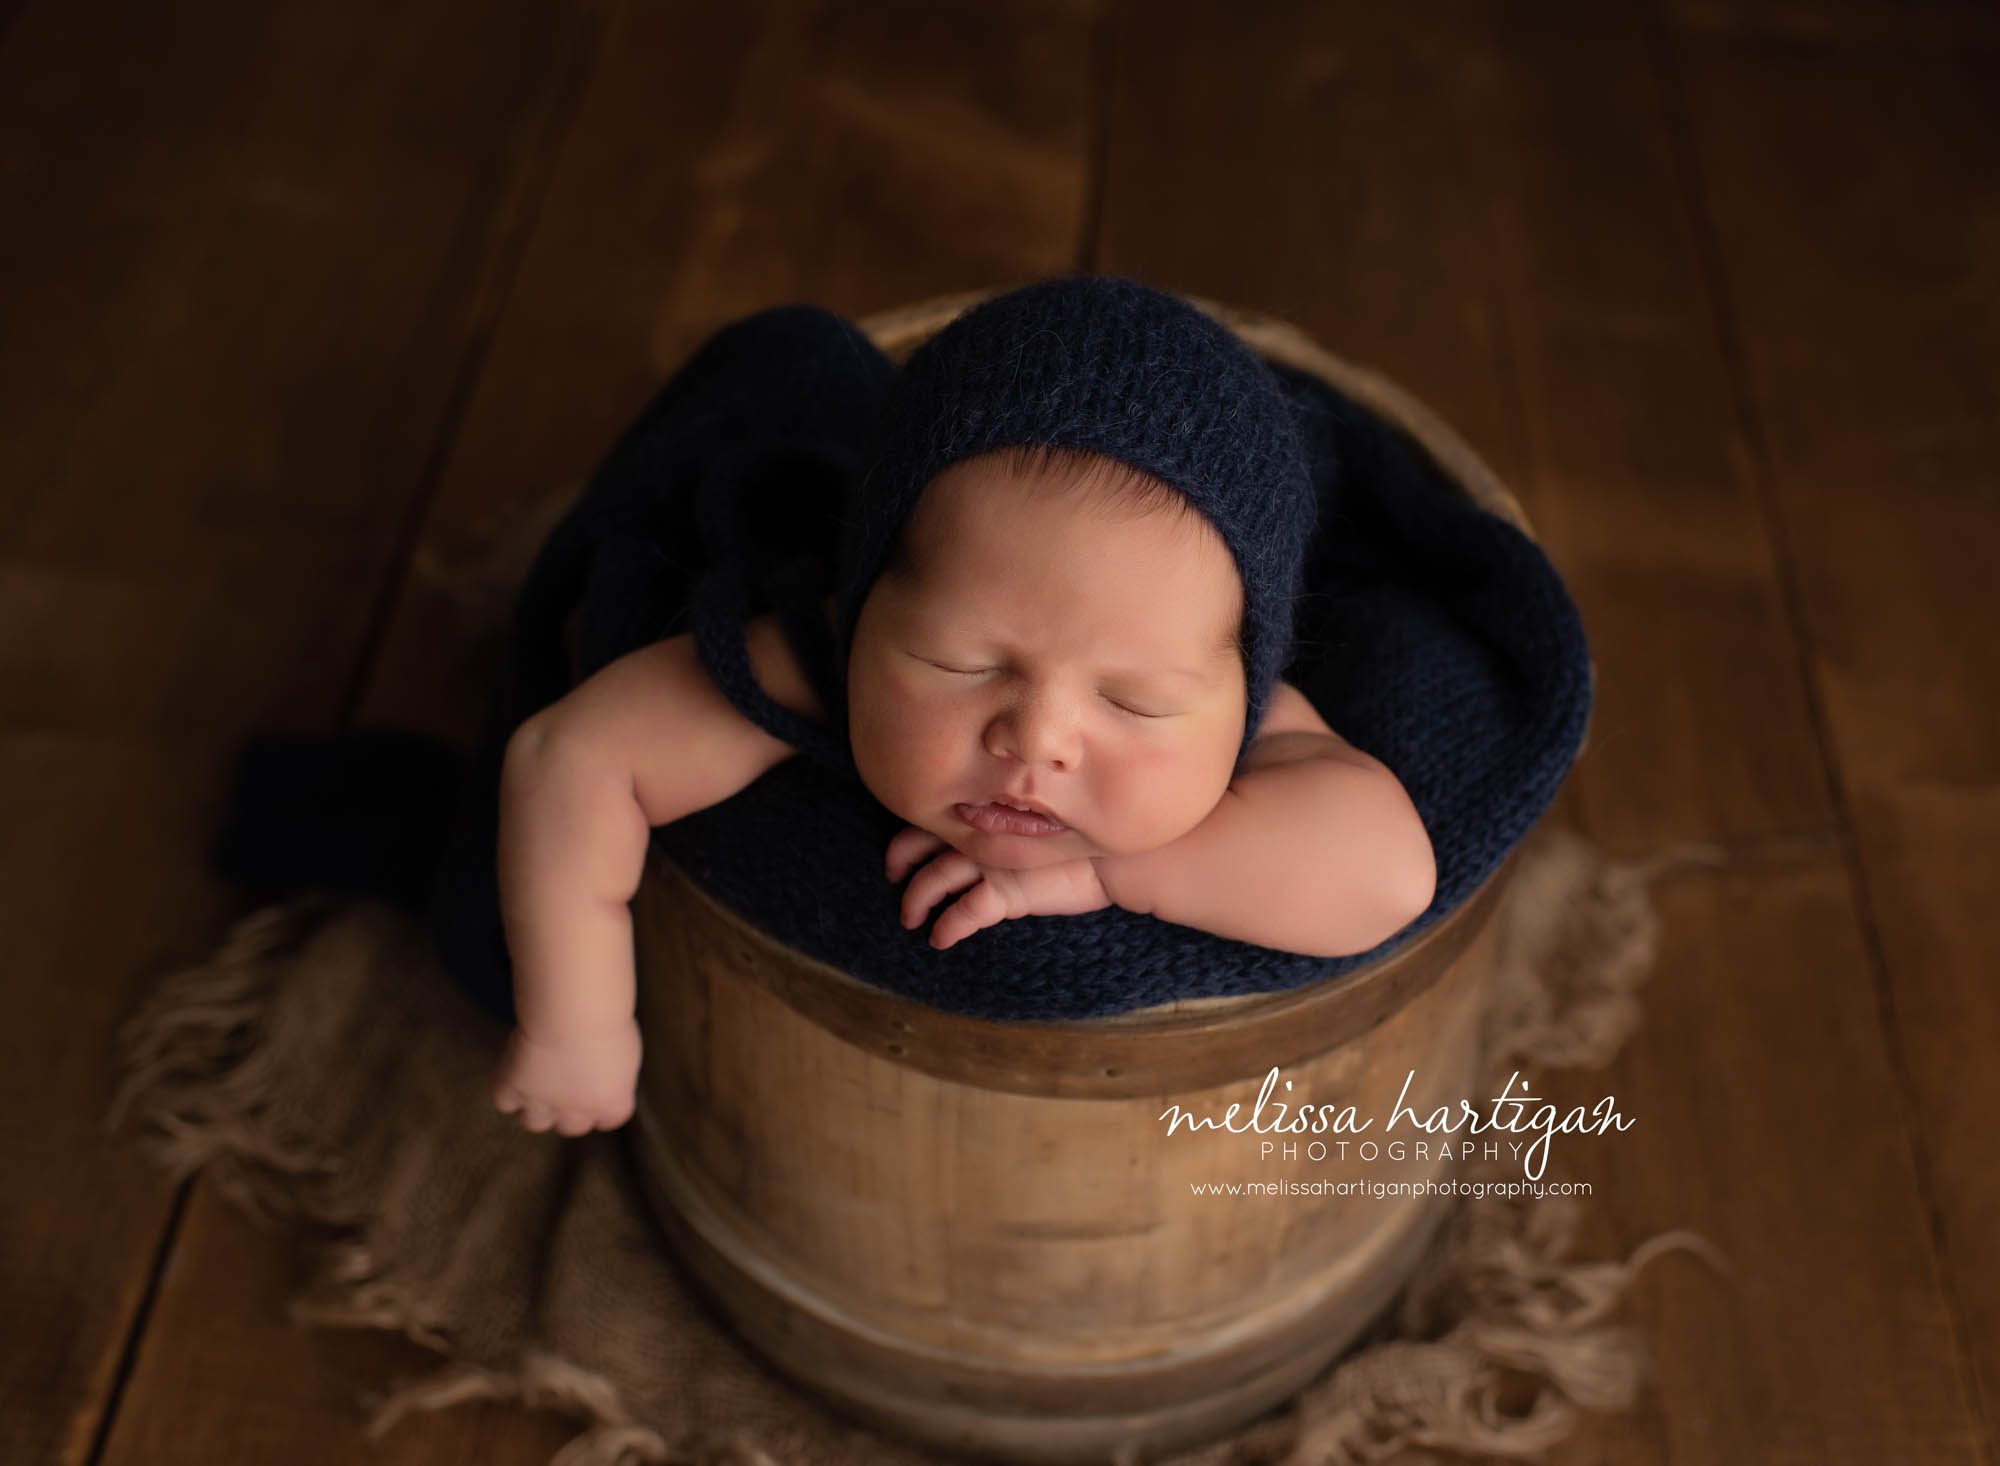 Newborn Baby boy wearing knitted navy blue hat posed in rustic bucket with arm hanging out